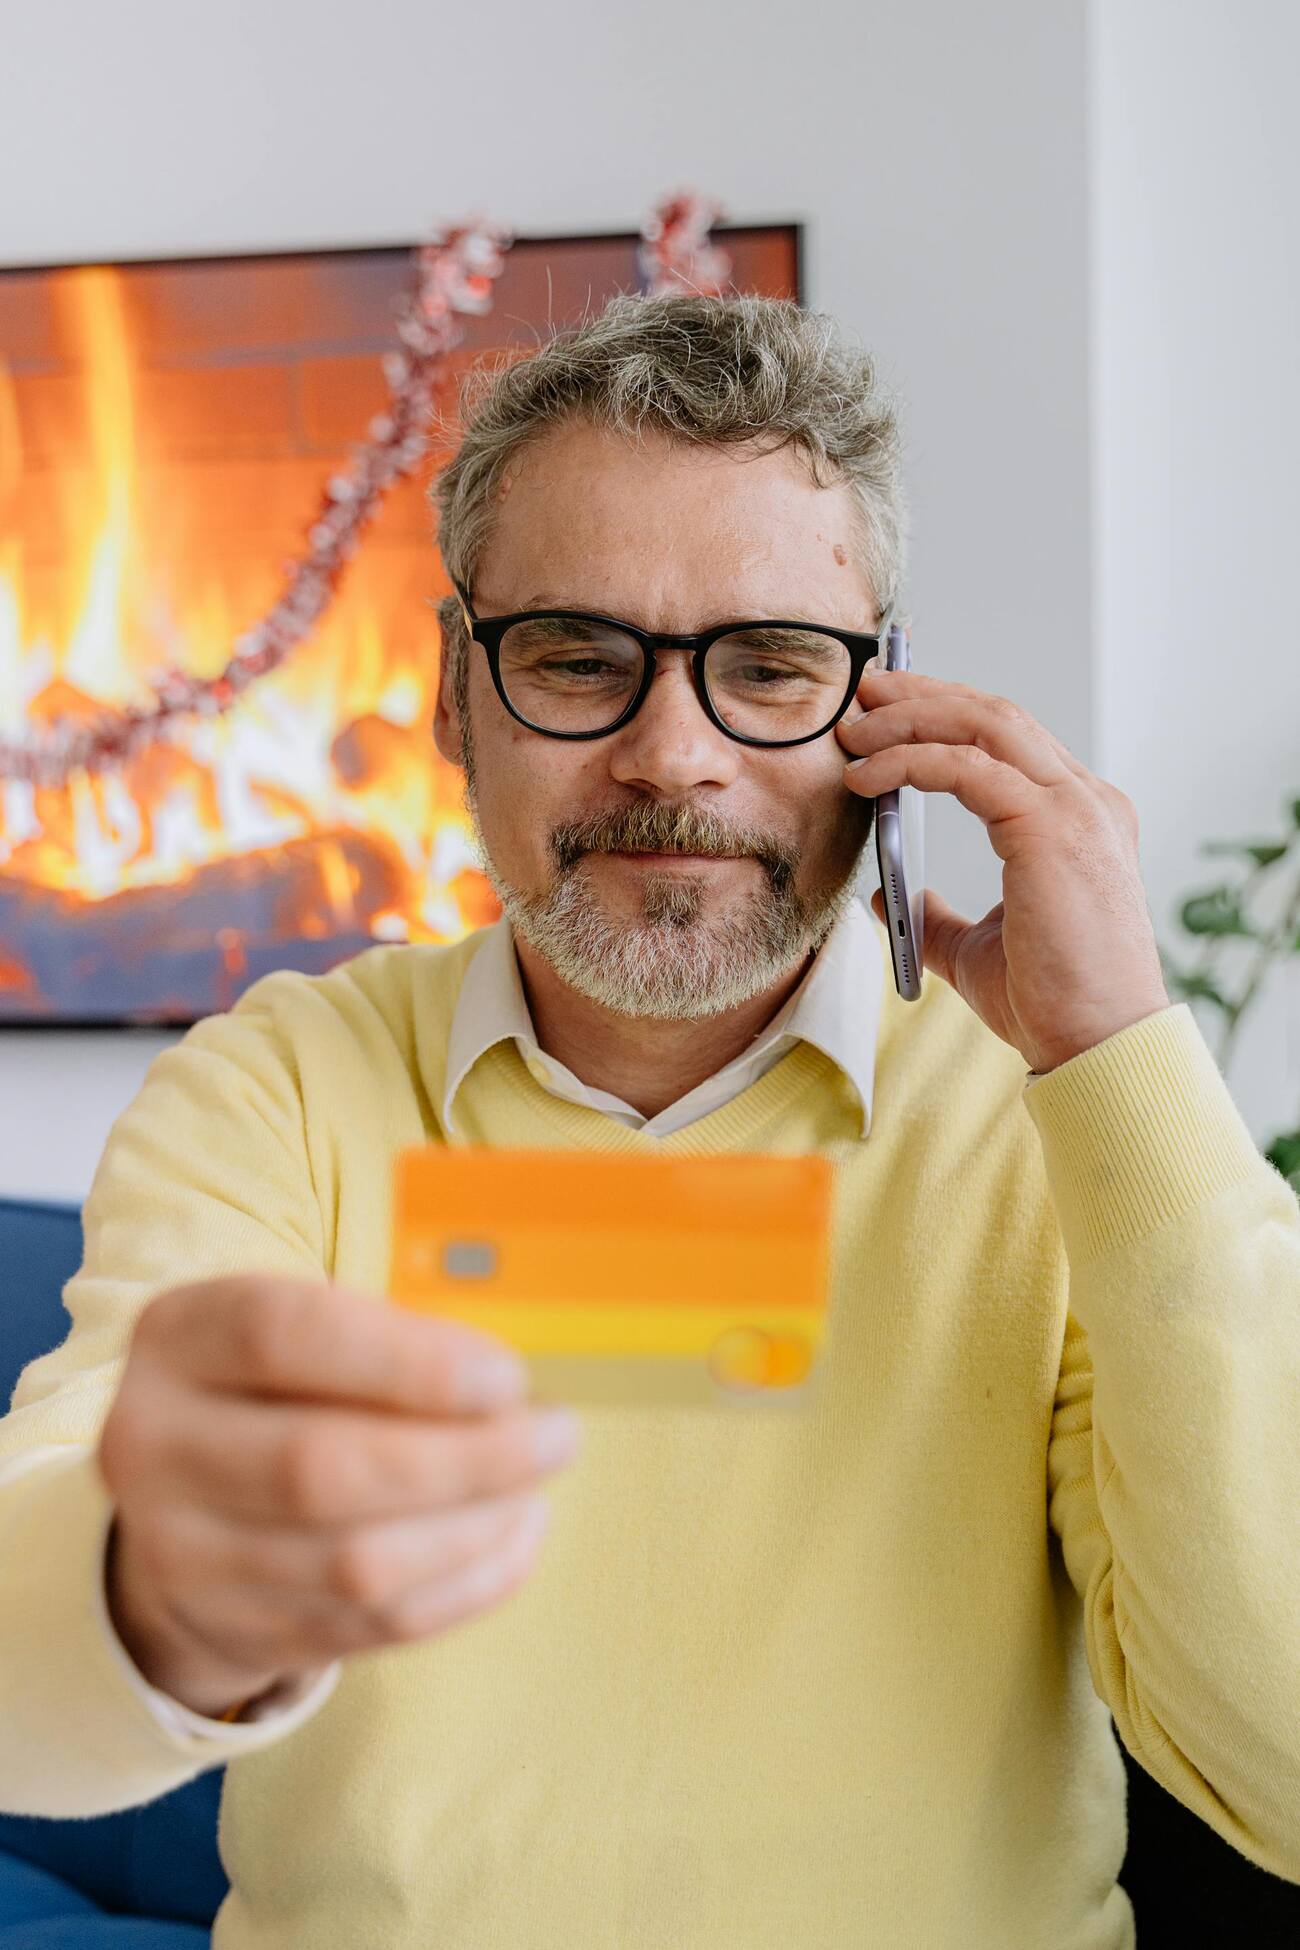 A man holding a credit card and talking on the phone, with a digital fireplace in the background